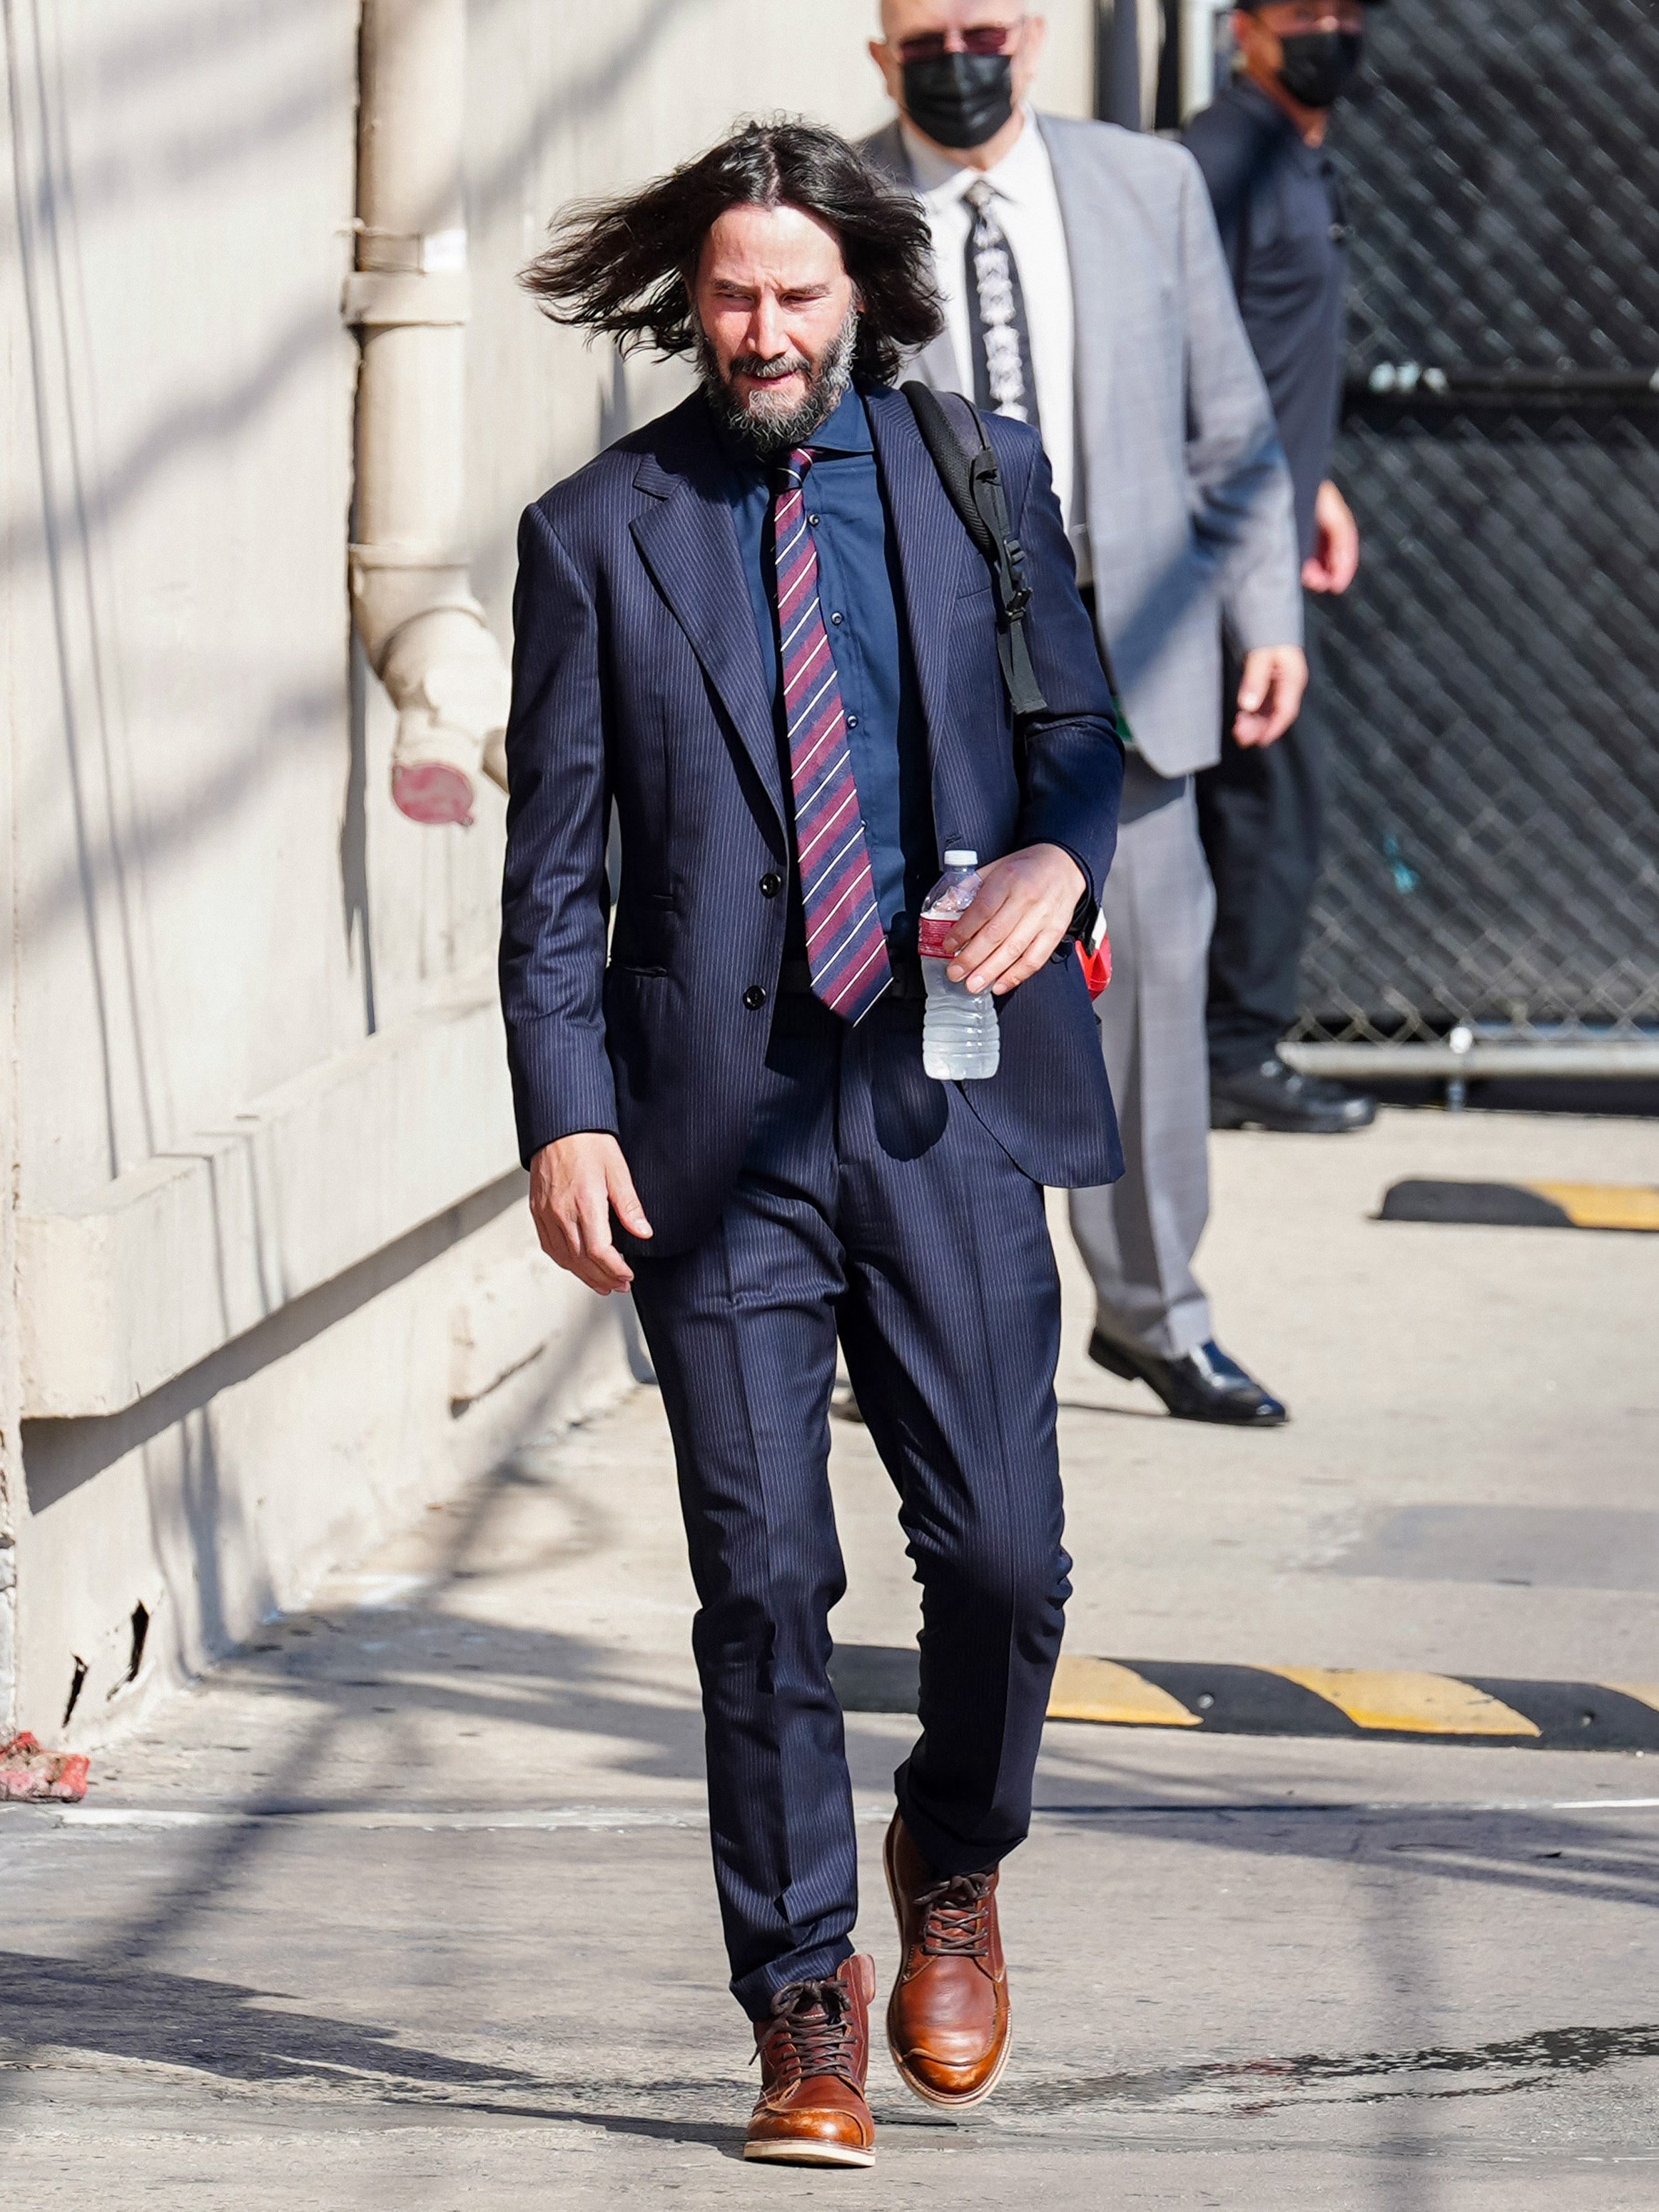 Keanu Reeves arriving to the 'Jimmy Kimmel Live' Show on October 05, 2022 in Los Angeles, California. | Source: Getty Images